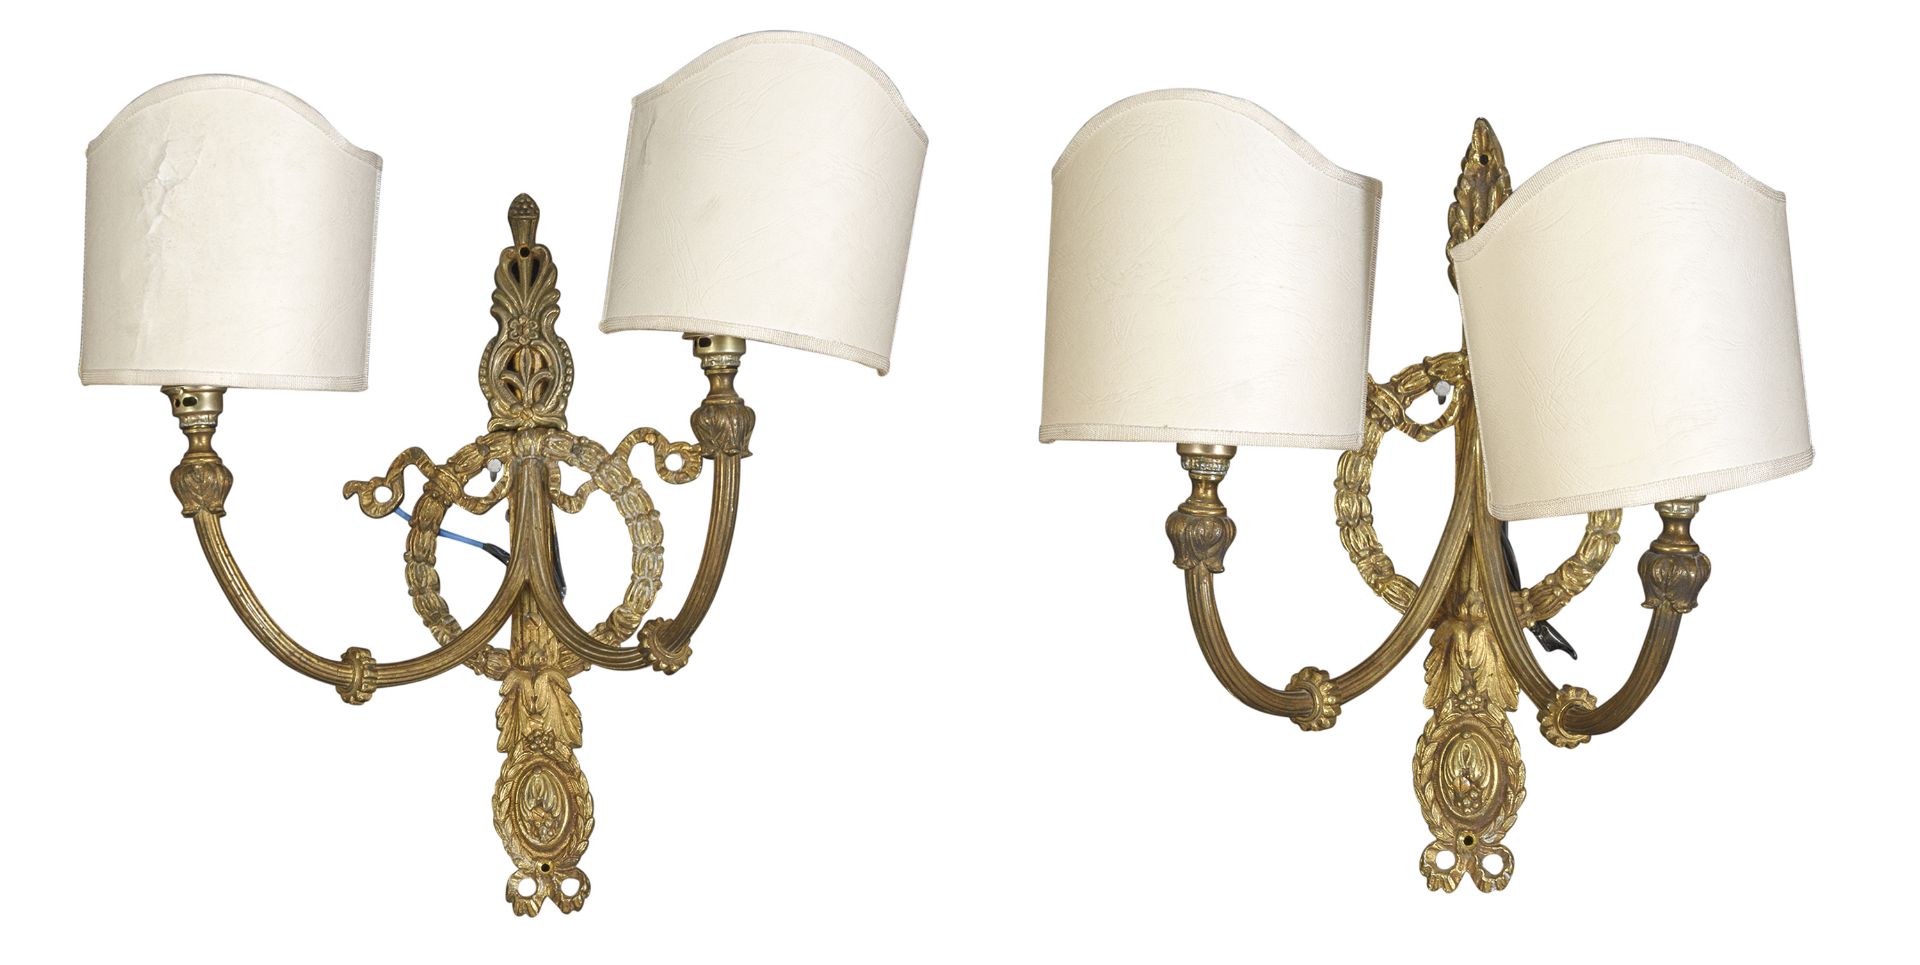 PAIR OF EMPIRE STYLE WALL LAMPS